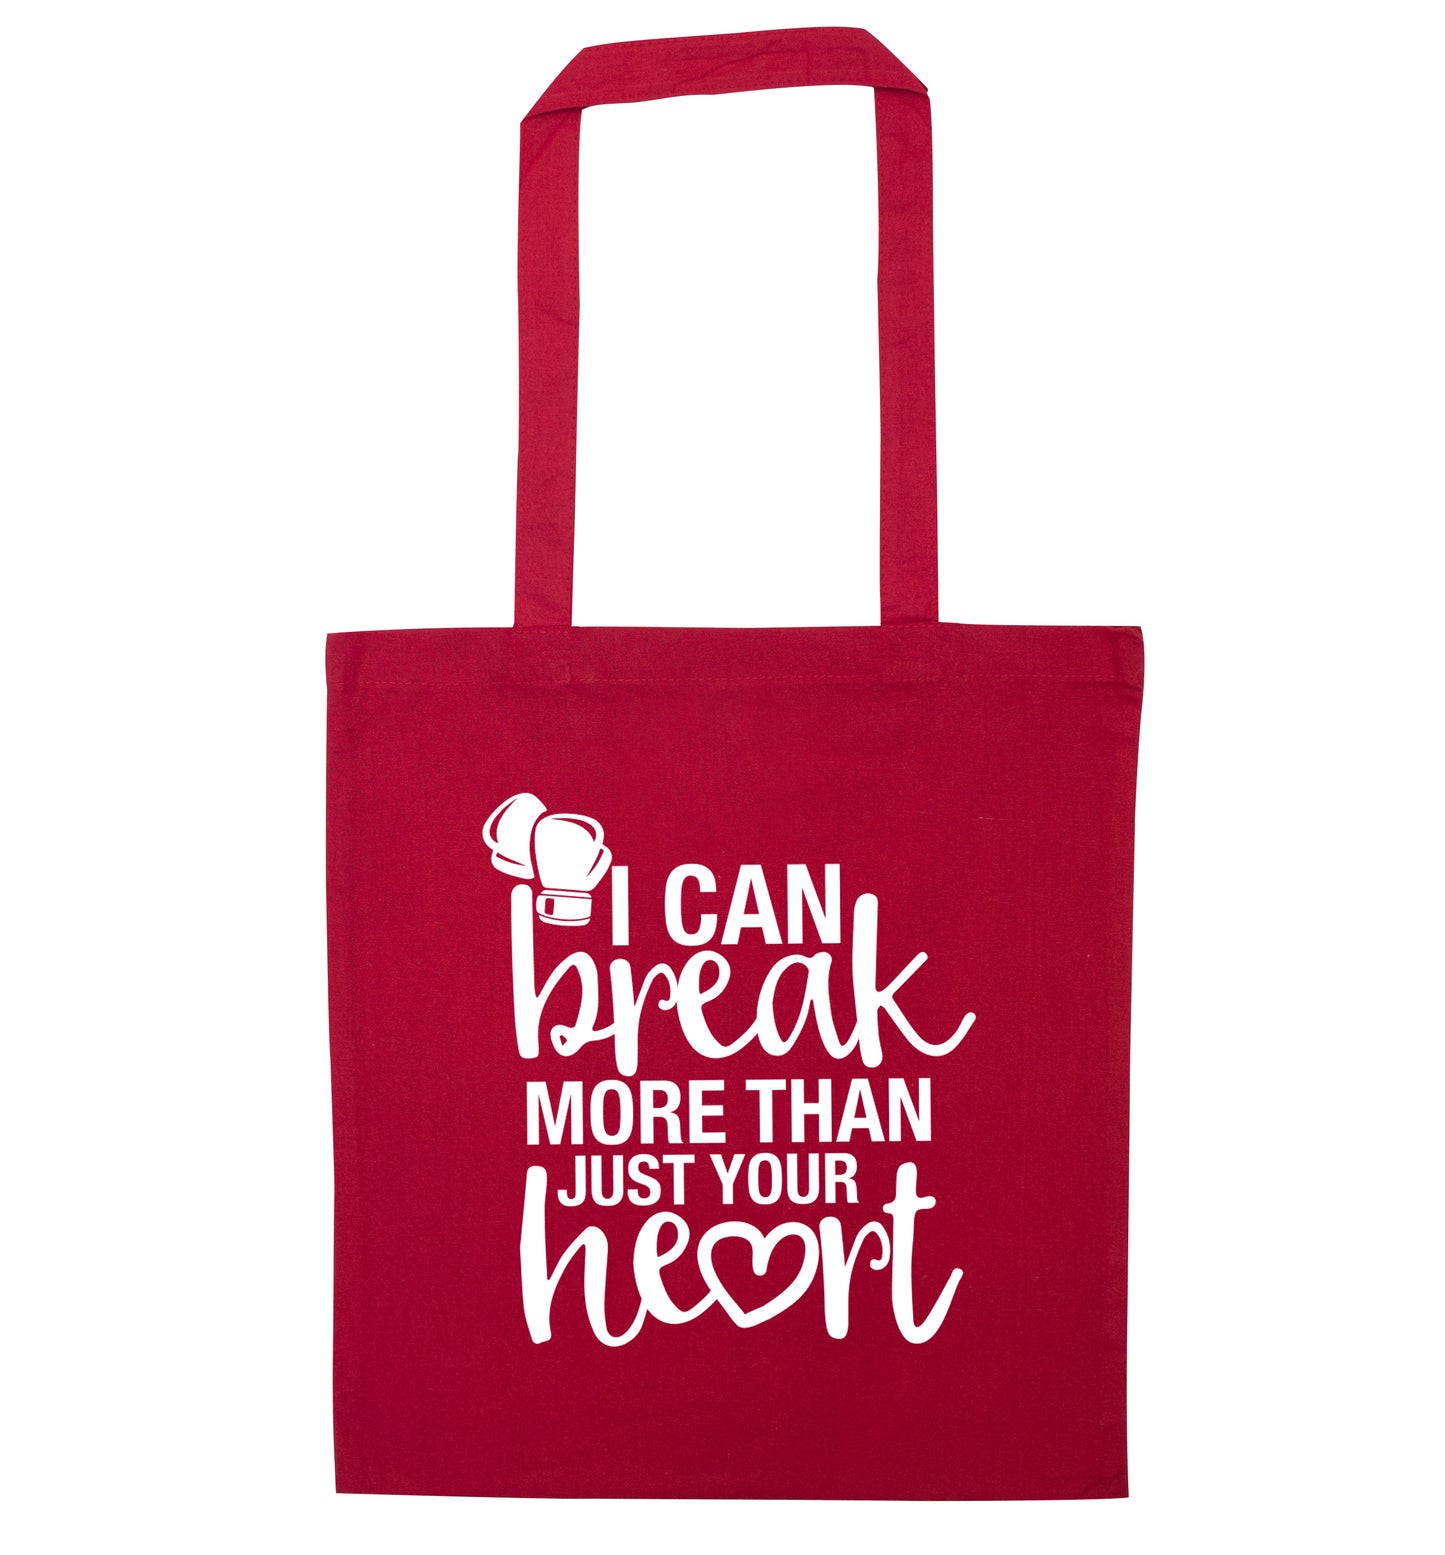 I can break more than just your heart red tote bag